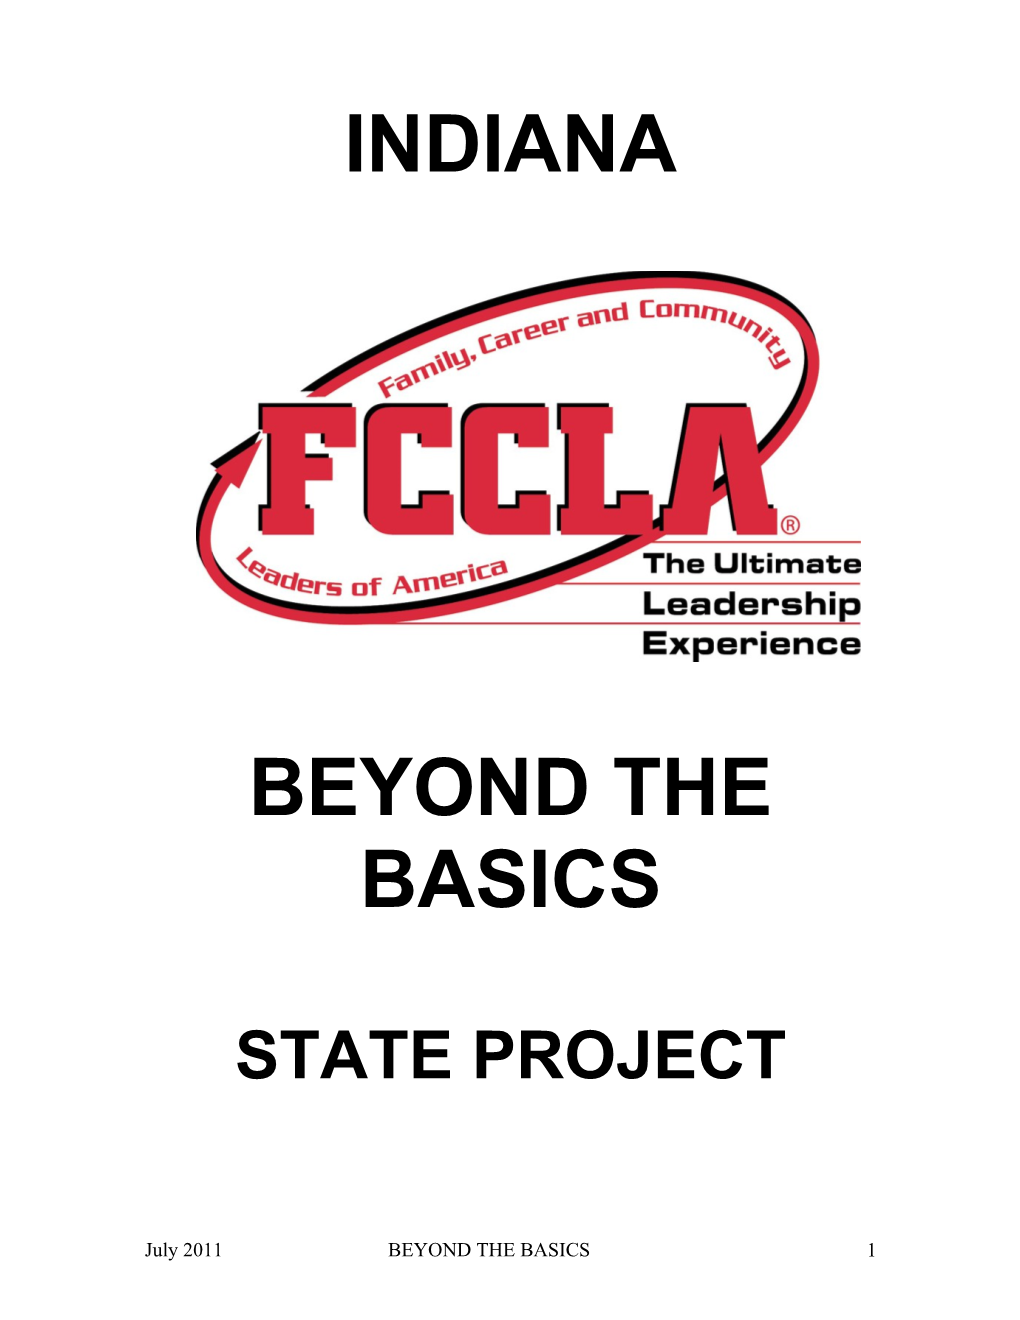 STATE PROJECT Indiana FCCLA State Project